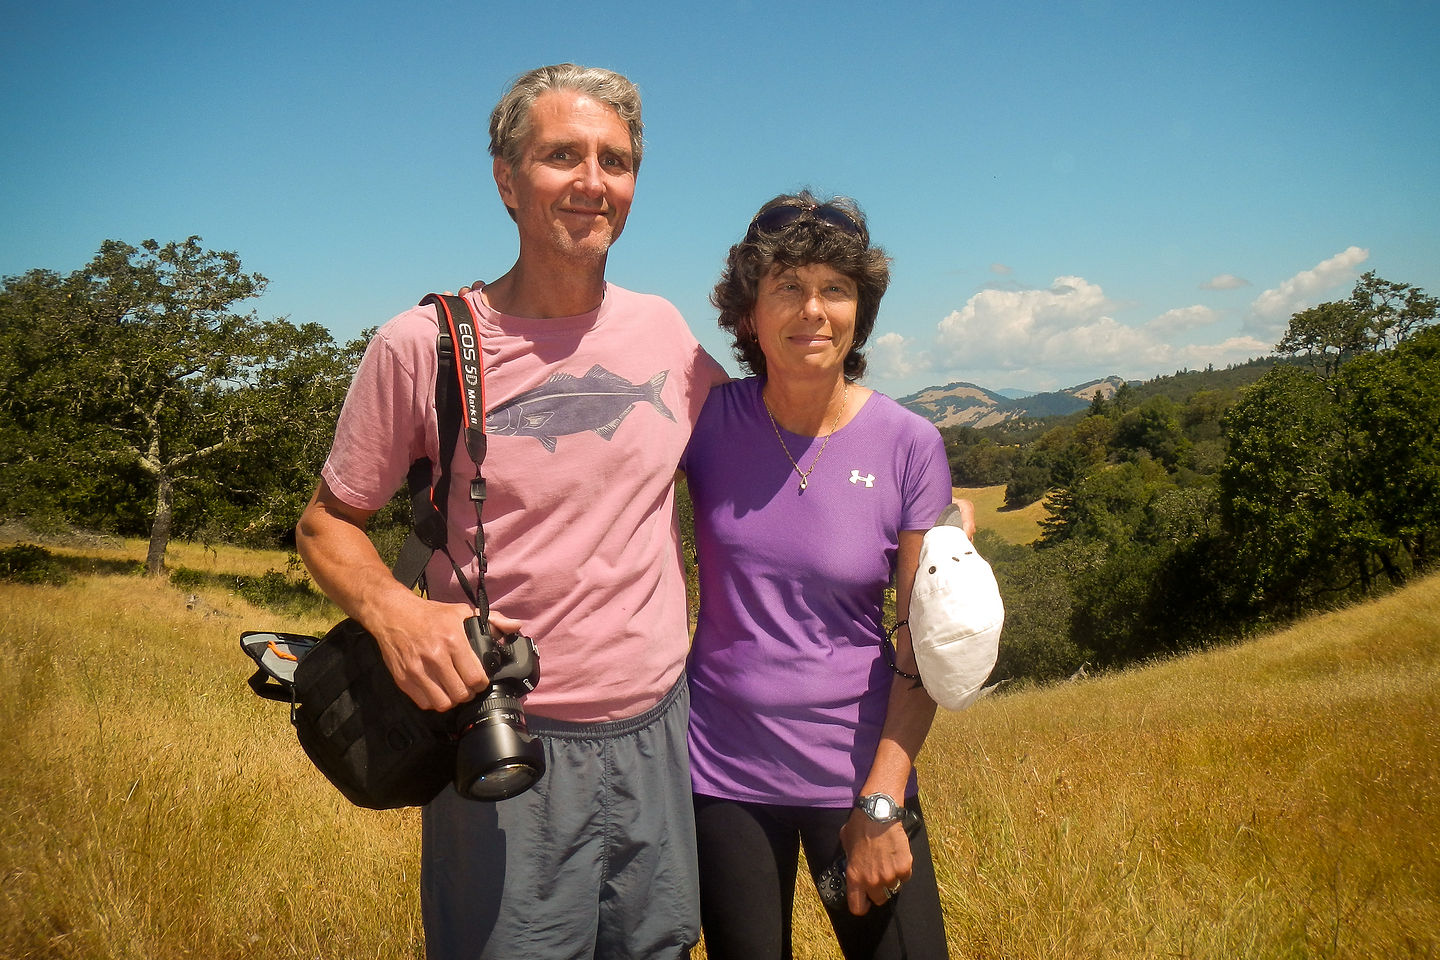 Lolo and Herb at Annadel State Park